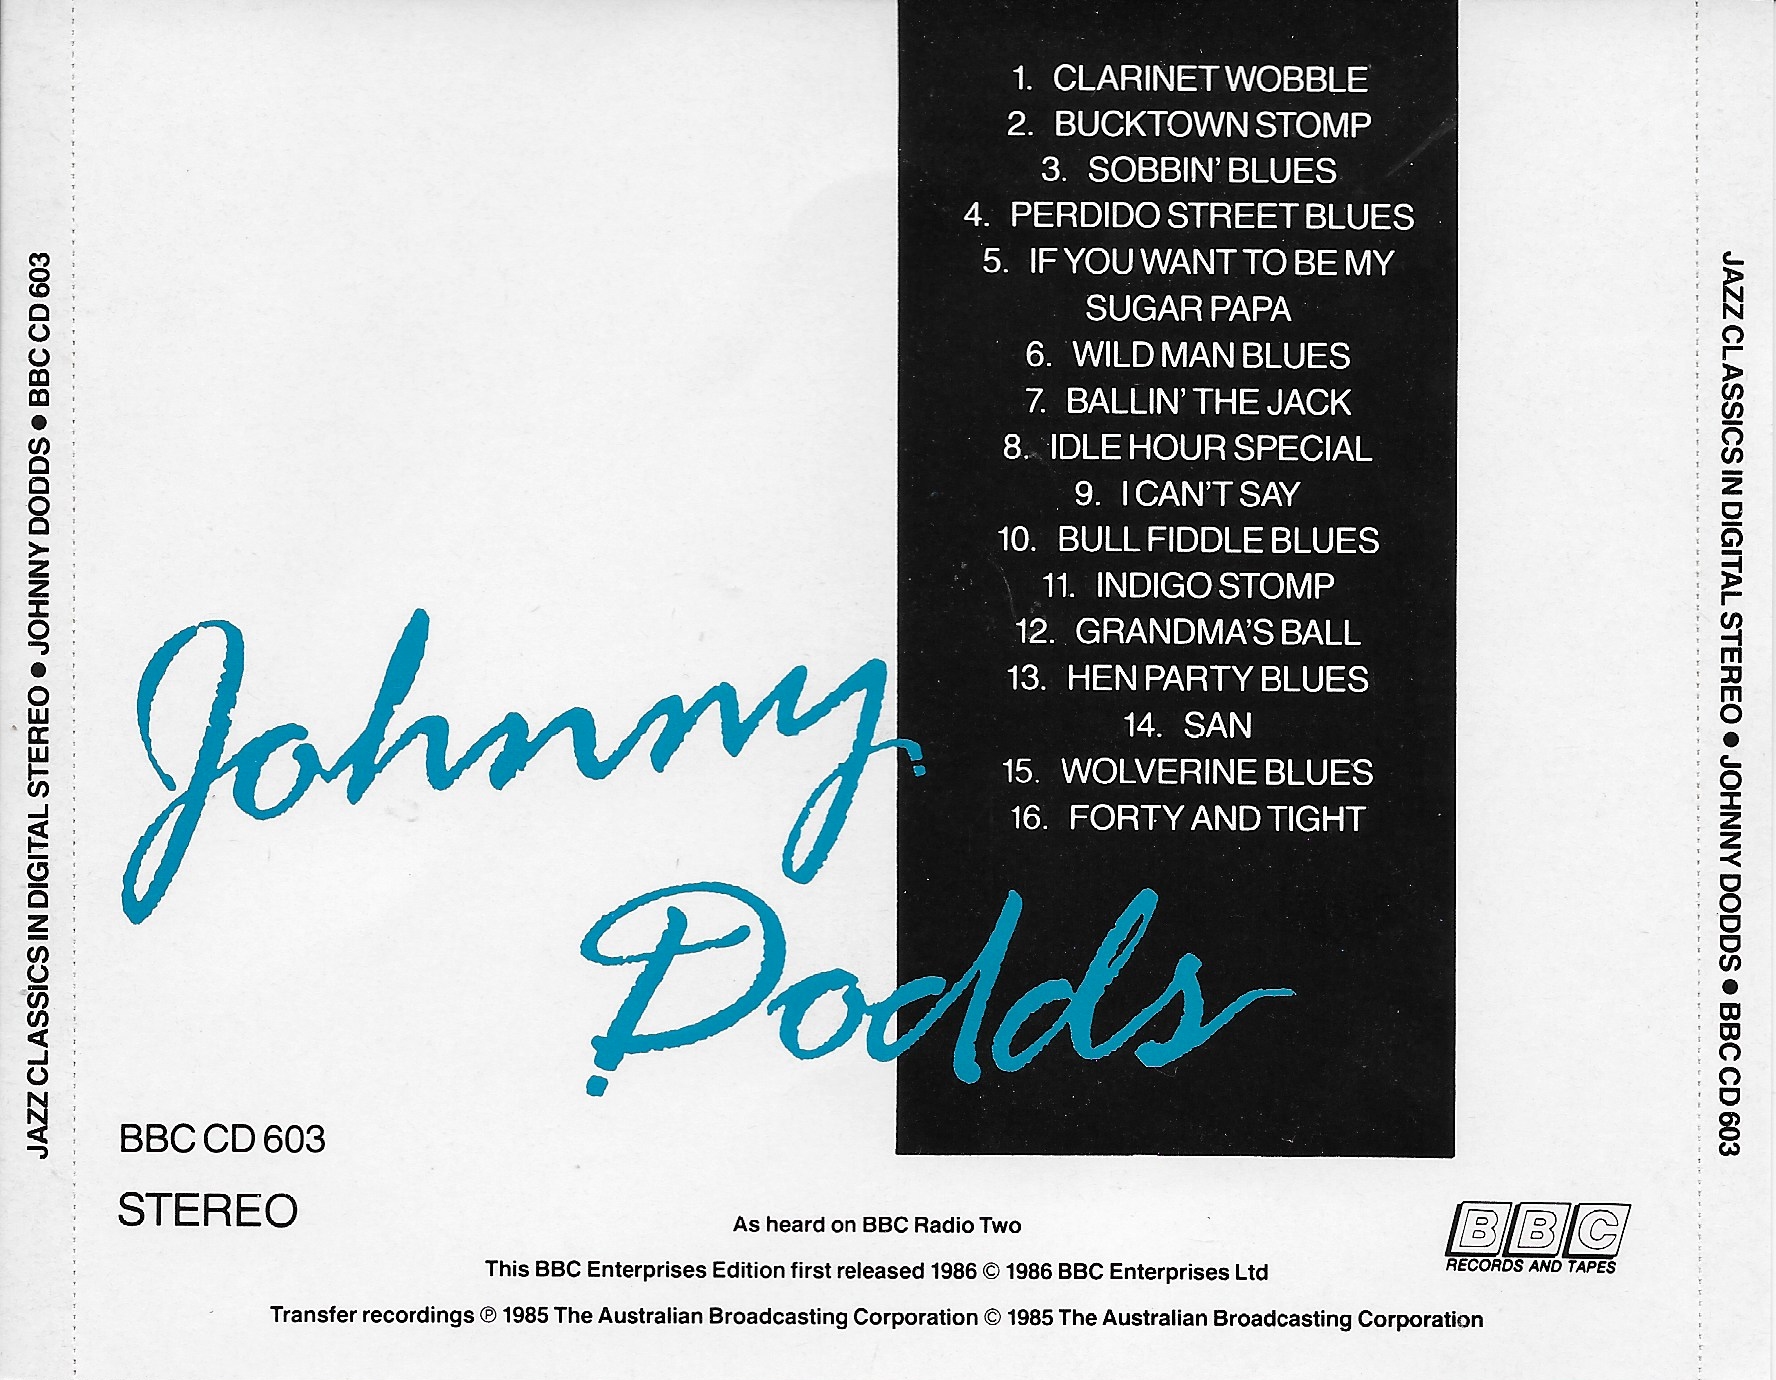 Picture of BBCCD603 Jazz Classics - Johnny Dodds by artist Johnny Dodds from the BBC records and Tapes library